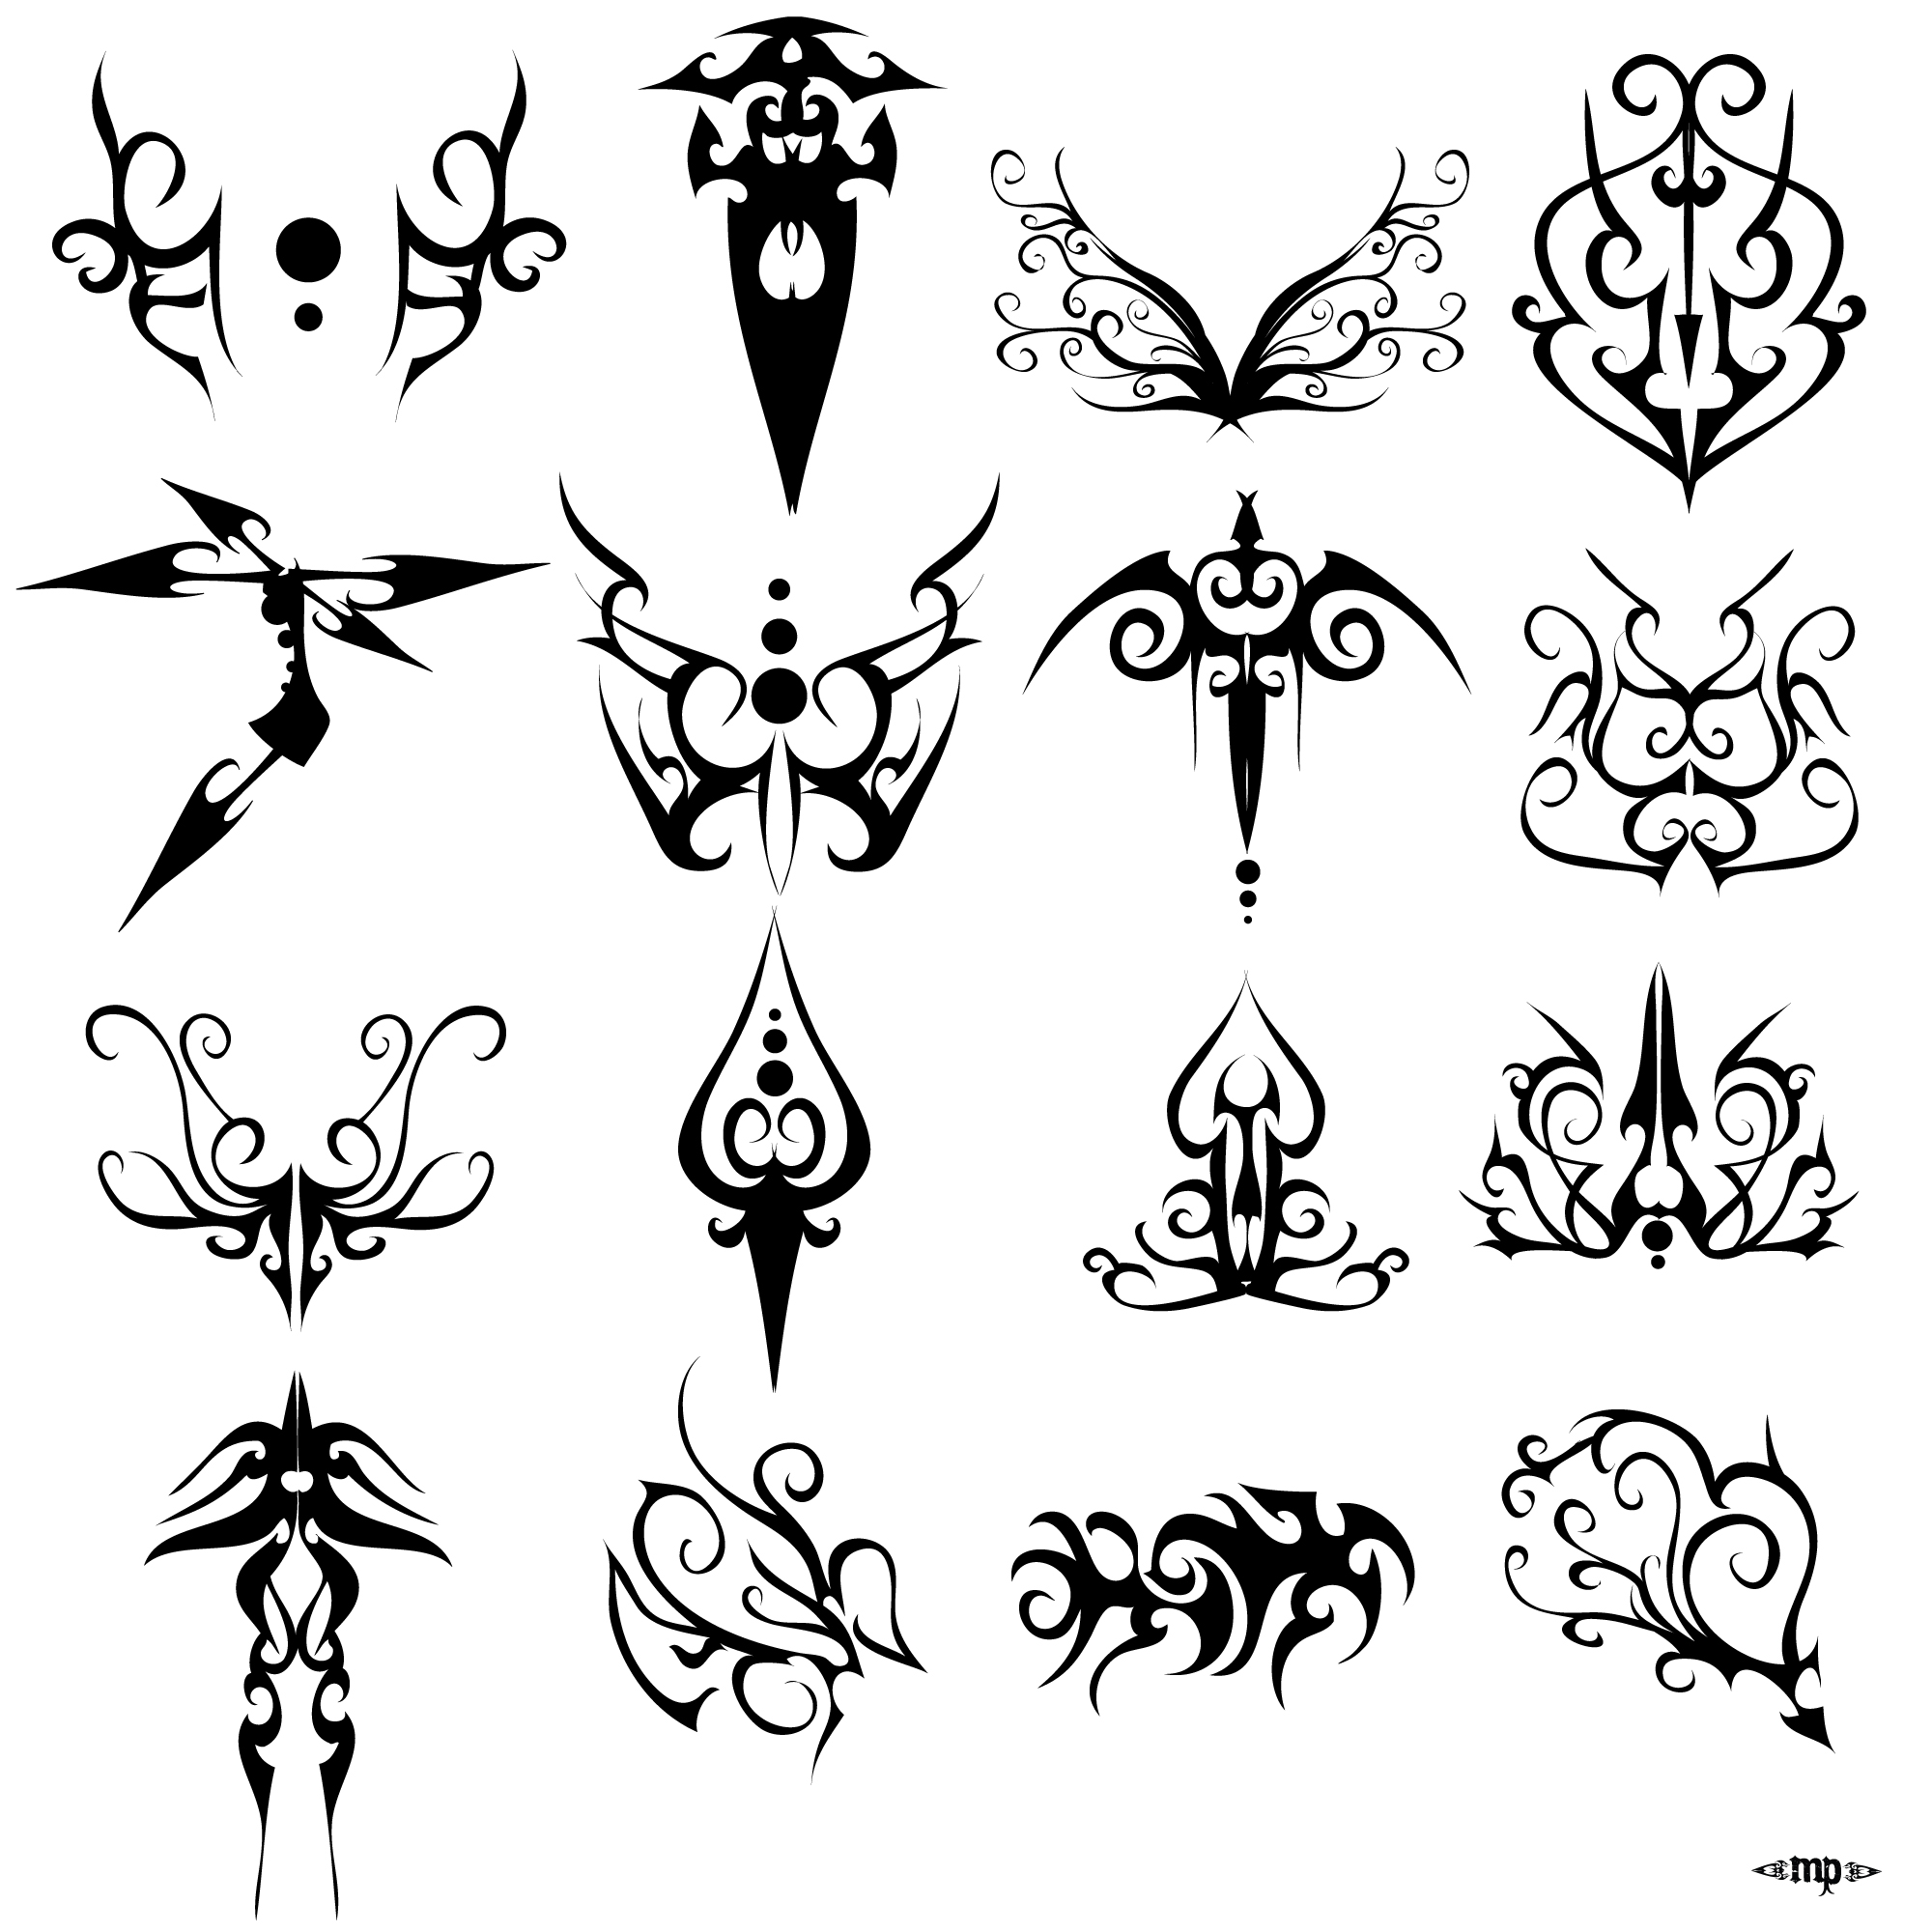 tattoos sketches ideas for men